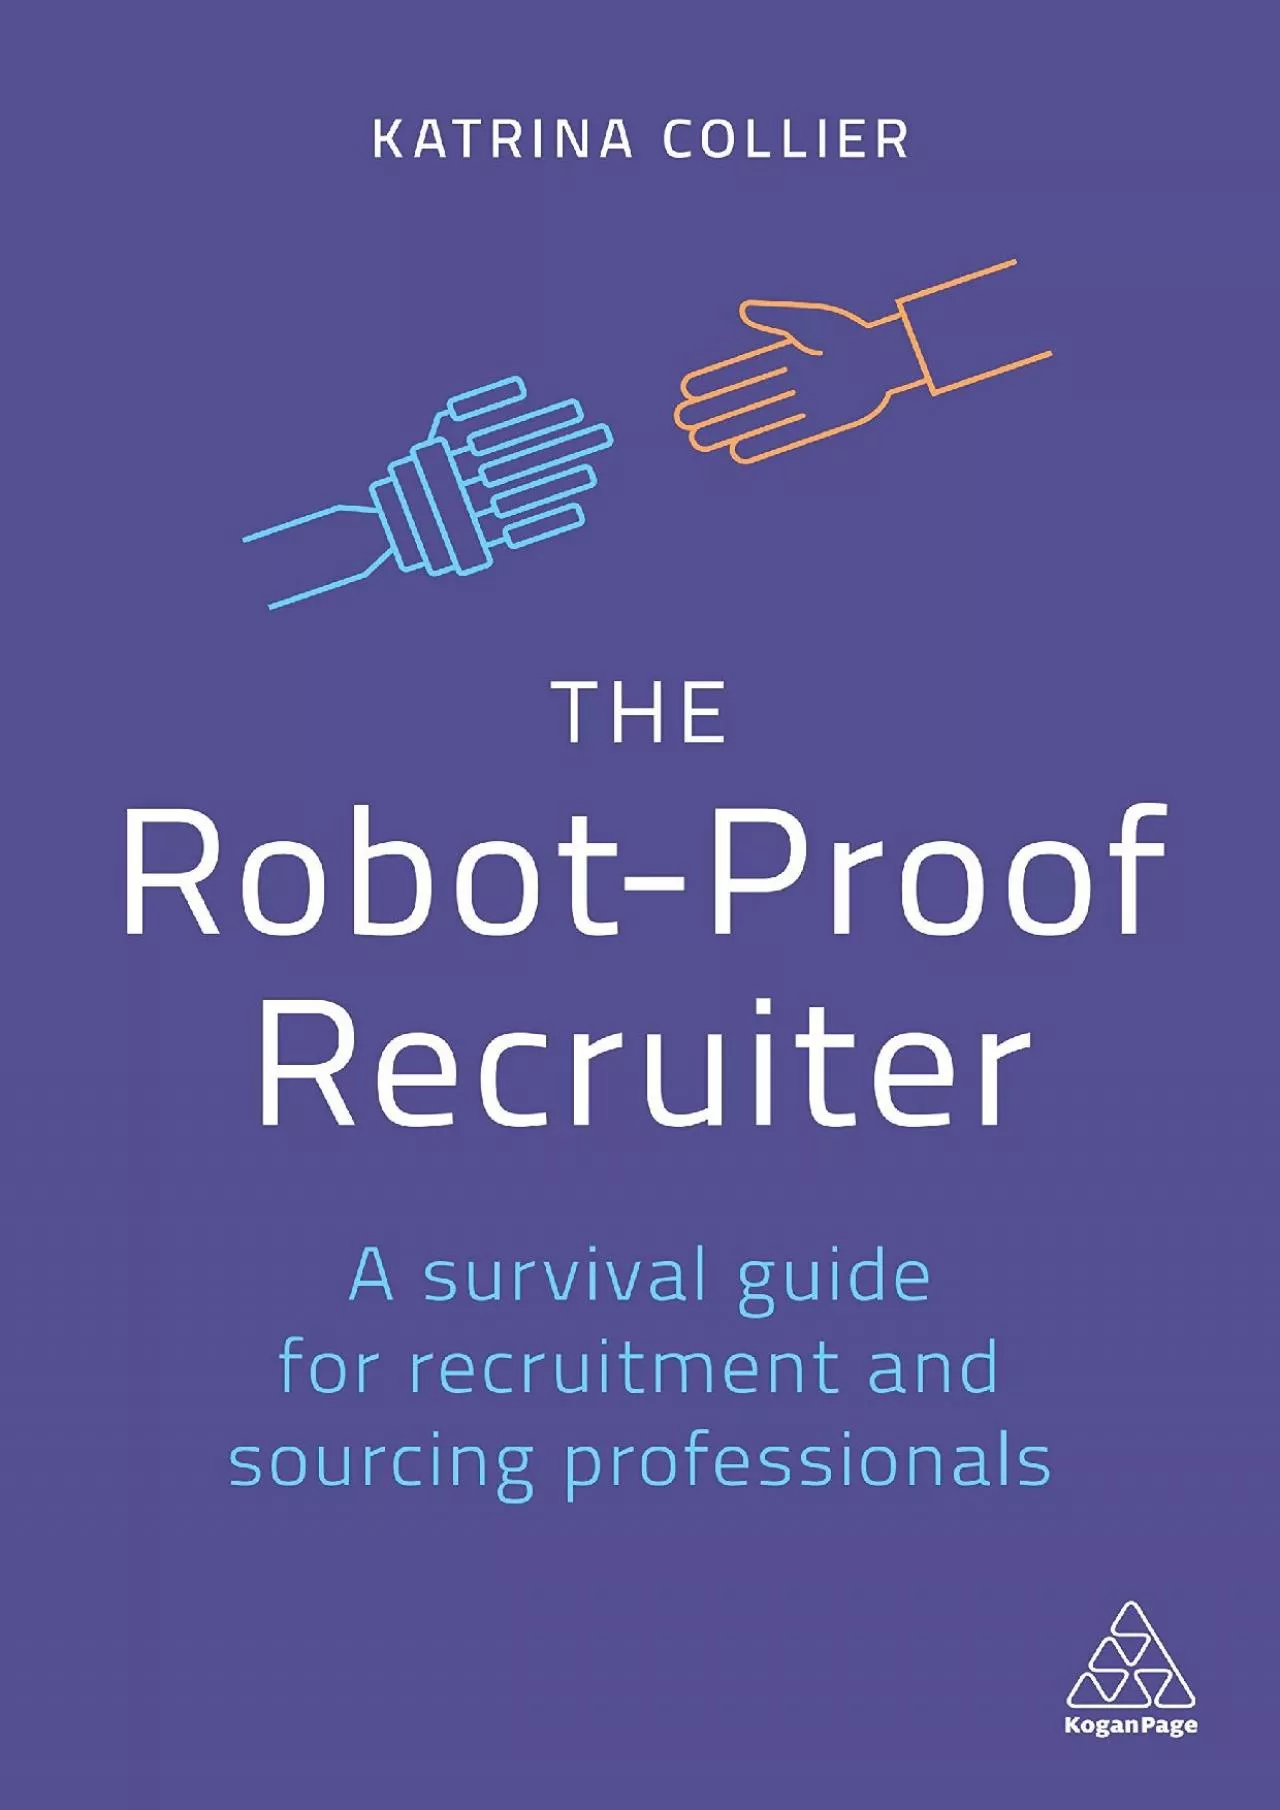 The Robot-Proof Recruiter: A Survival Guide for Recruitment and Sourcing Professionals